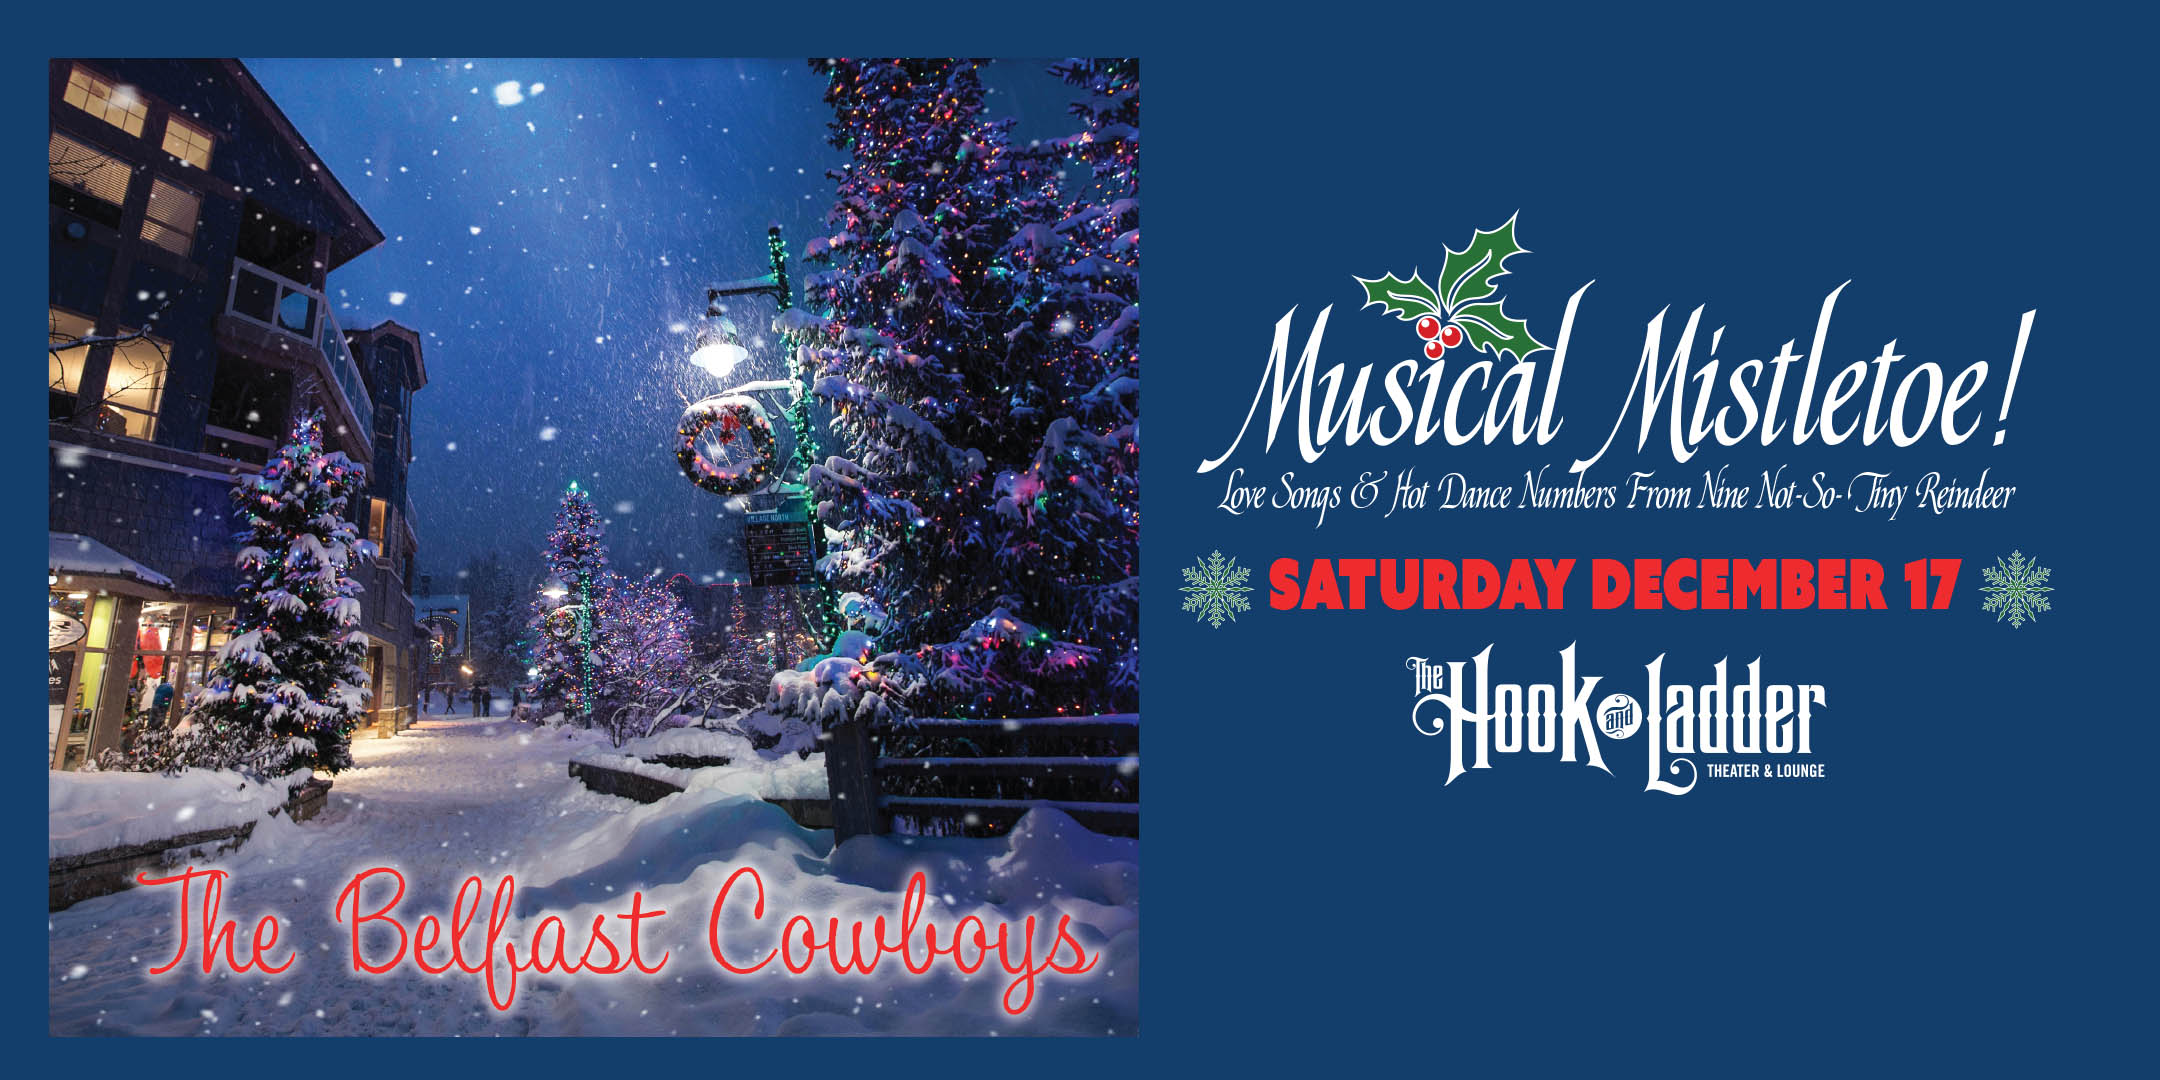 The Belfast Cowboys' Musical Mistletoe! Love Songs & Hot Dance Numbers From Nine Not-So-Tiny Reindeer Saturday, December 17 at The Hook and Ladder Theater Doors 7pm :: Music 7:30pm :: 21+ $15 Advance / $20 Day of Show